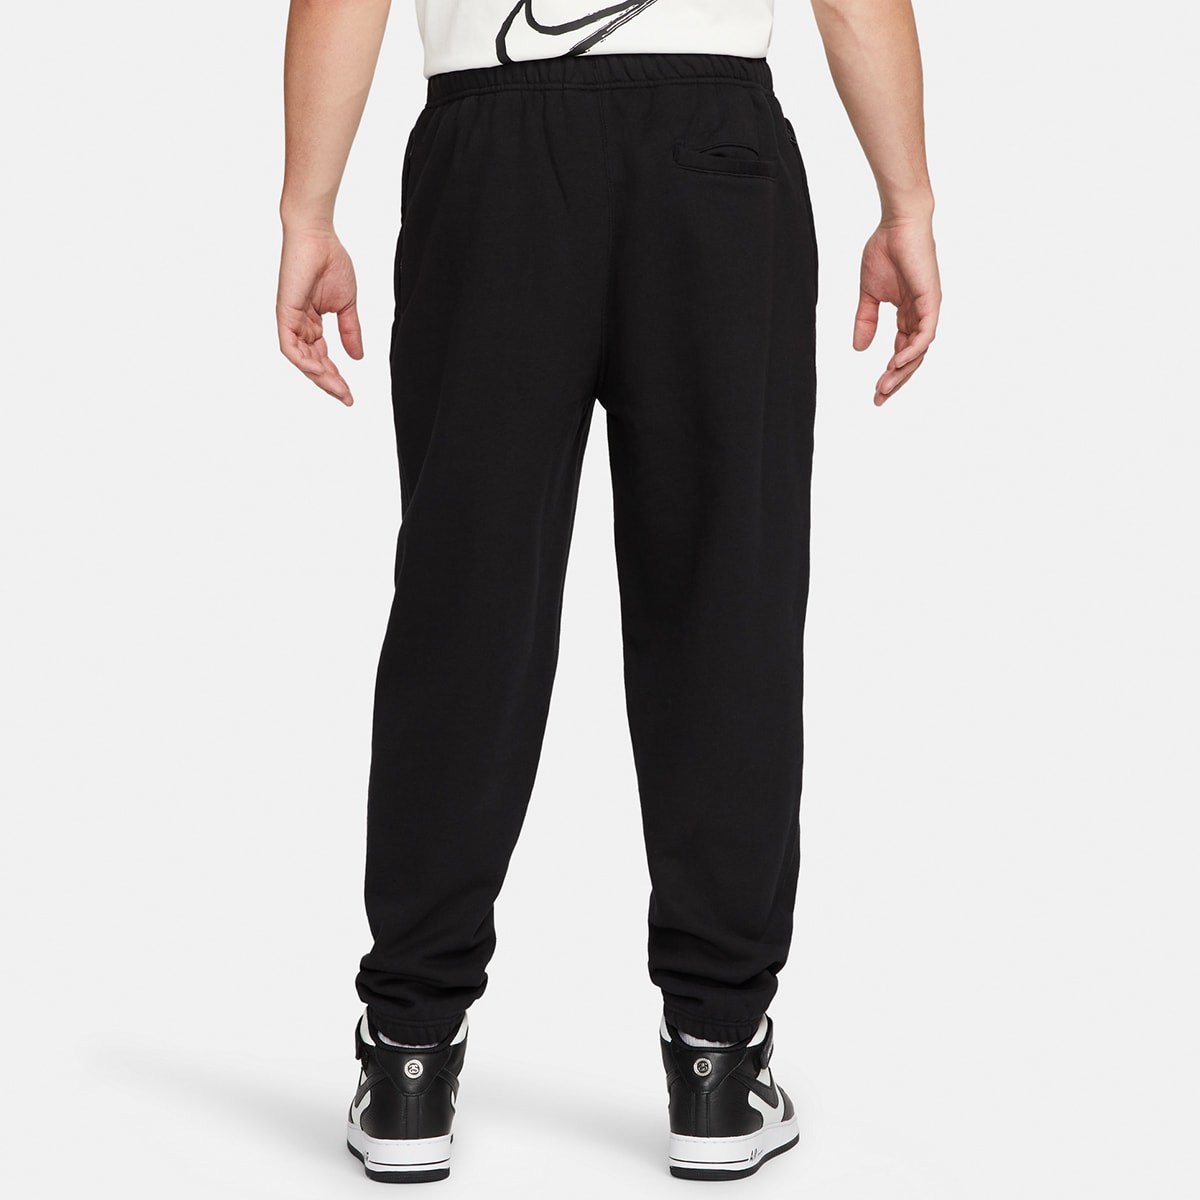 Nike x Stussy Washed Fleece Pant (Black) | END. Launches